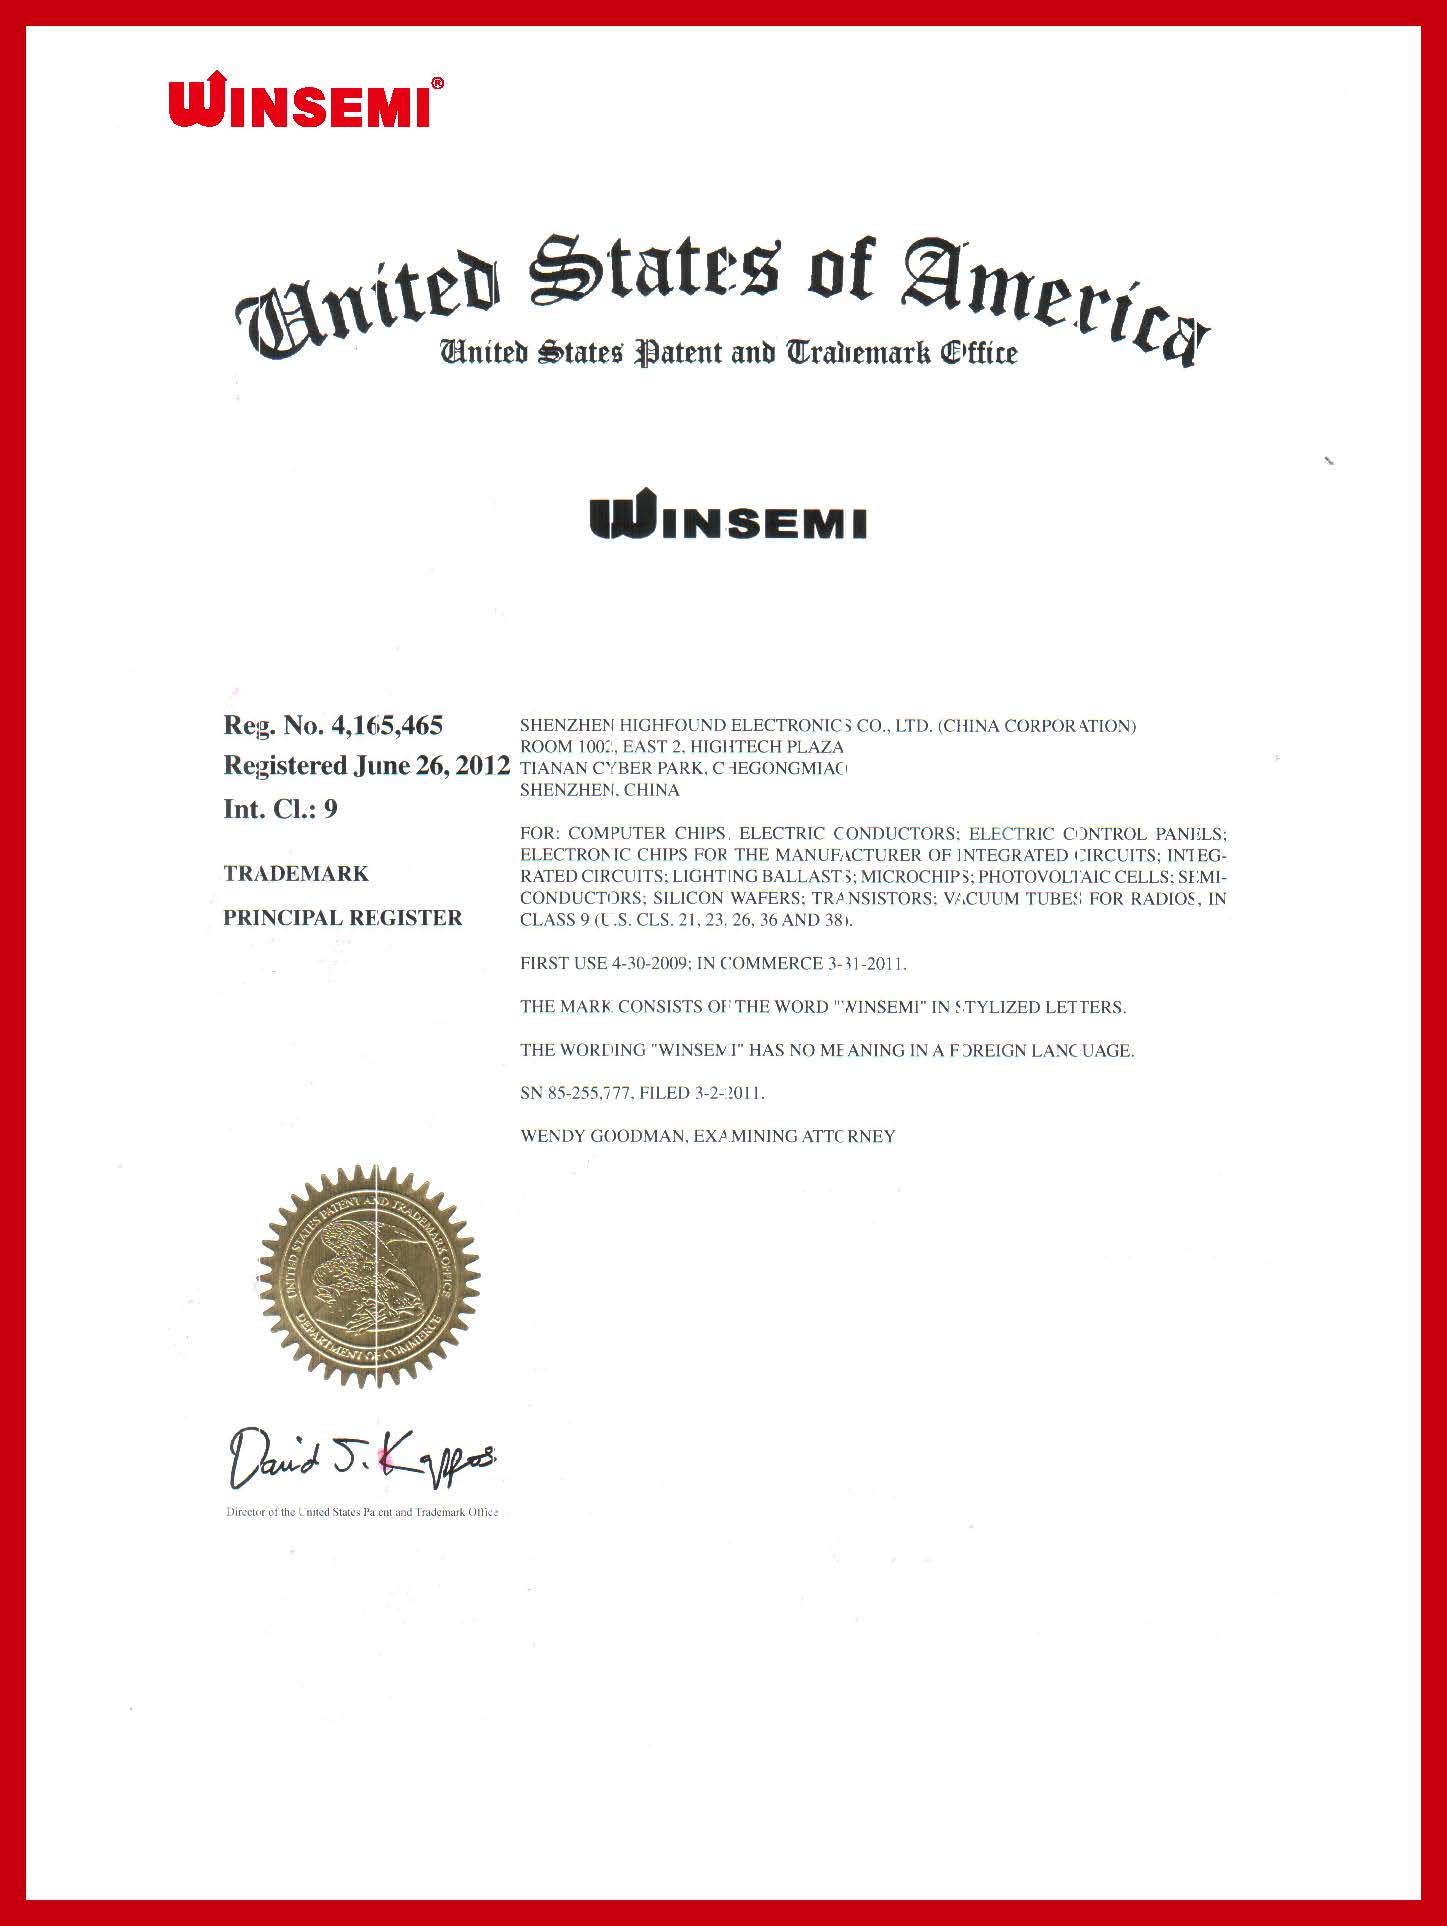 The United States trademark Certificate